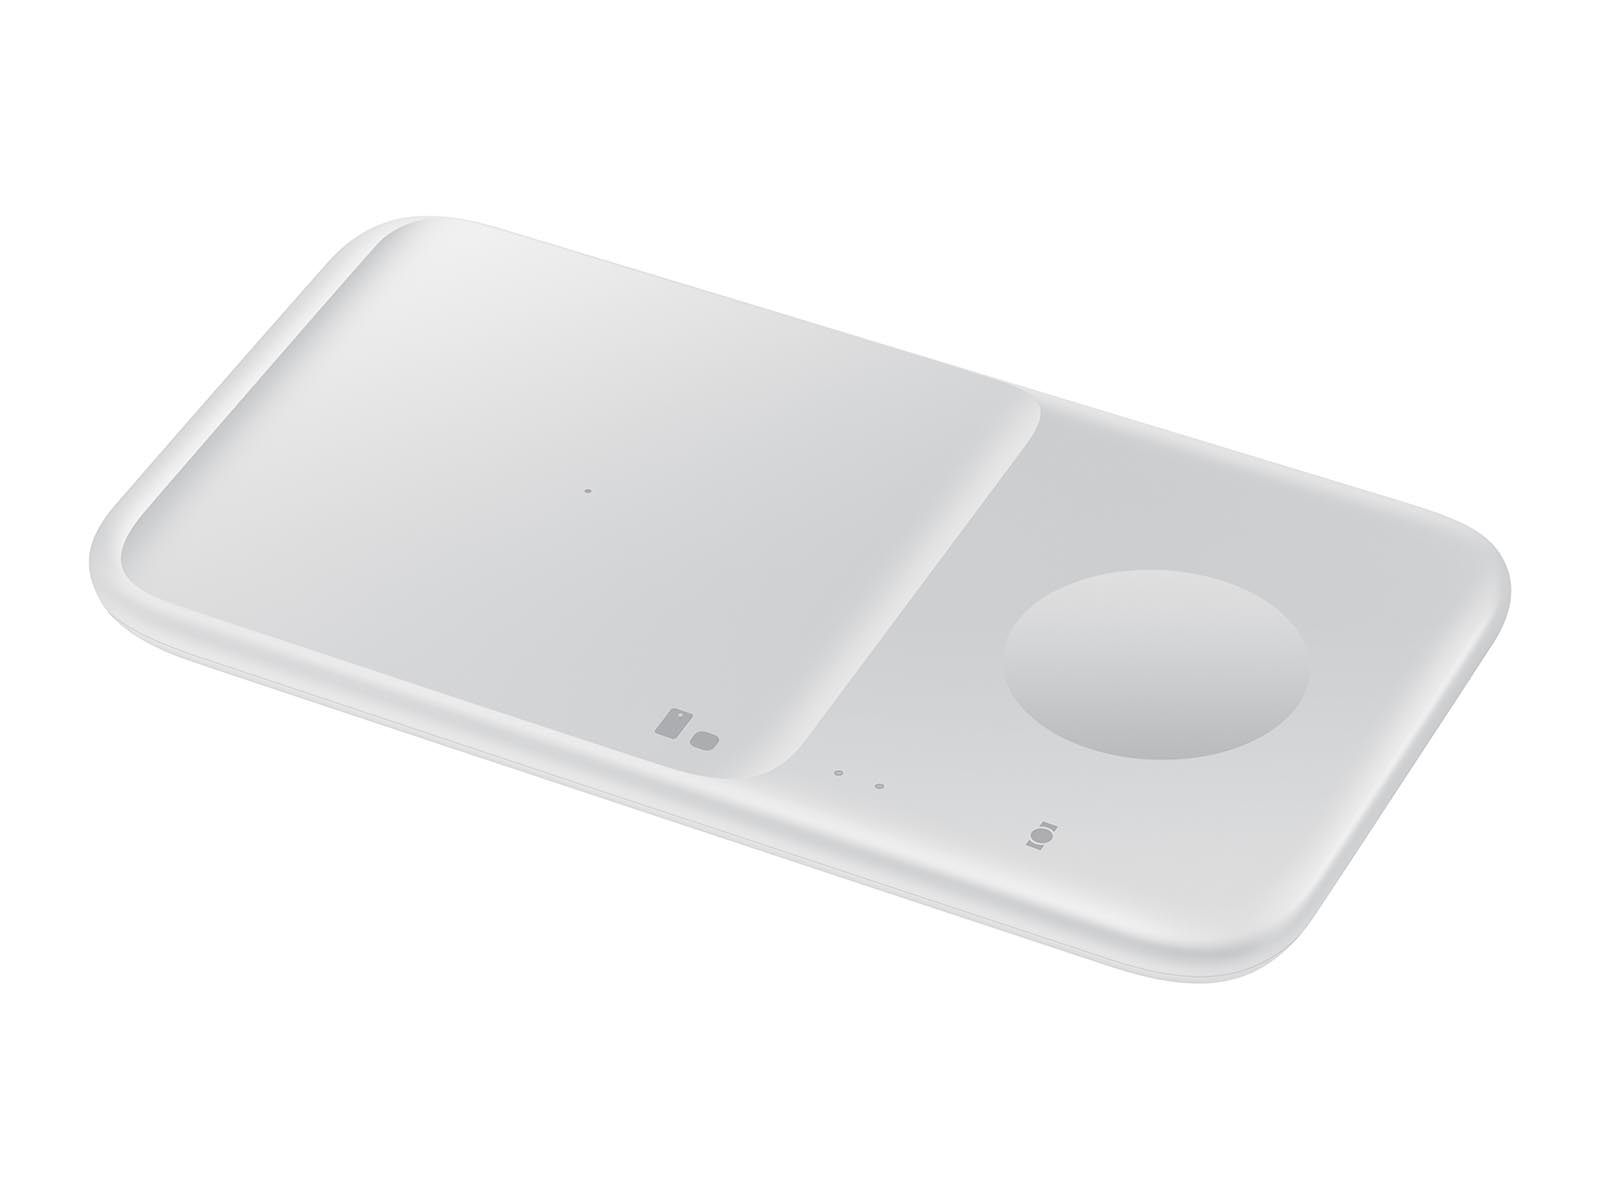 Wireless Charger Duo, White Mobile Accessories - EP-P4300TWEGUS | Samsung US